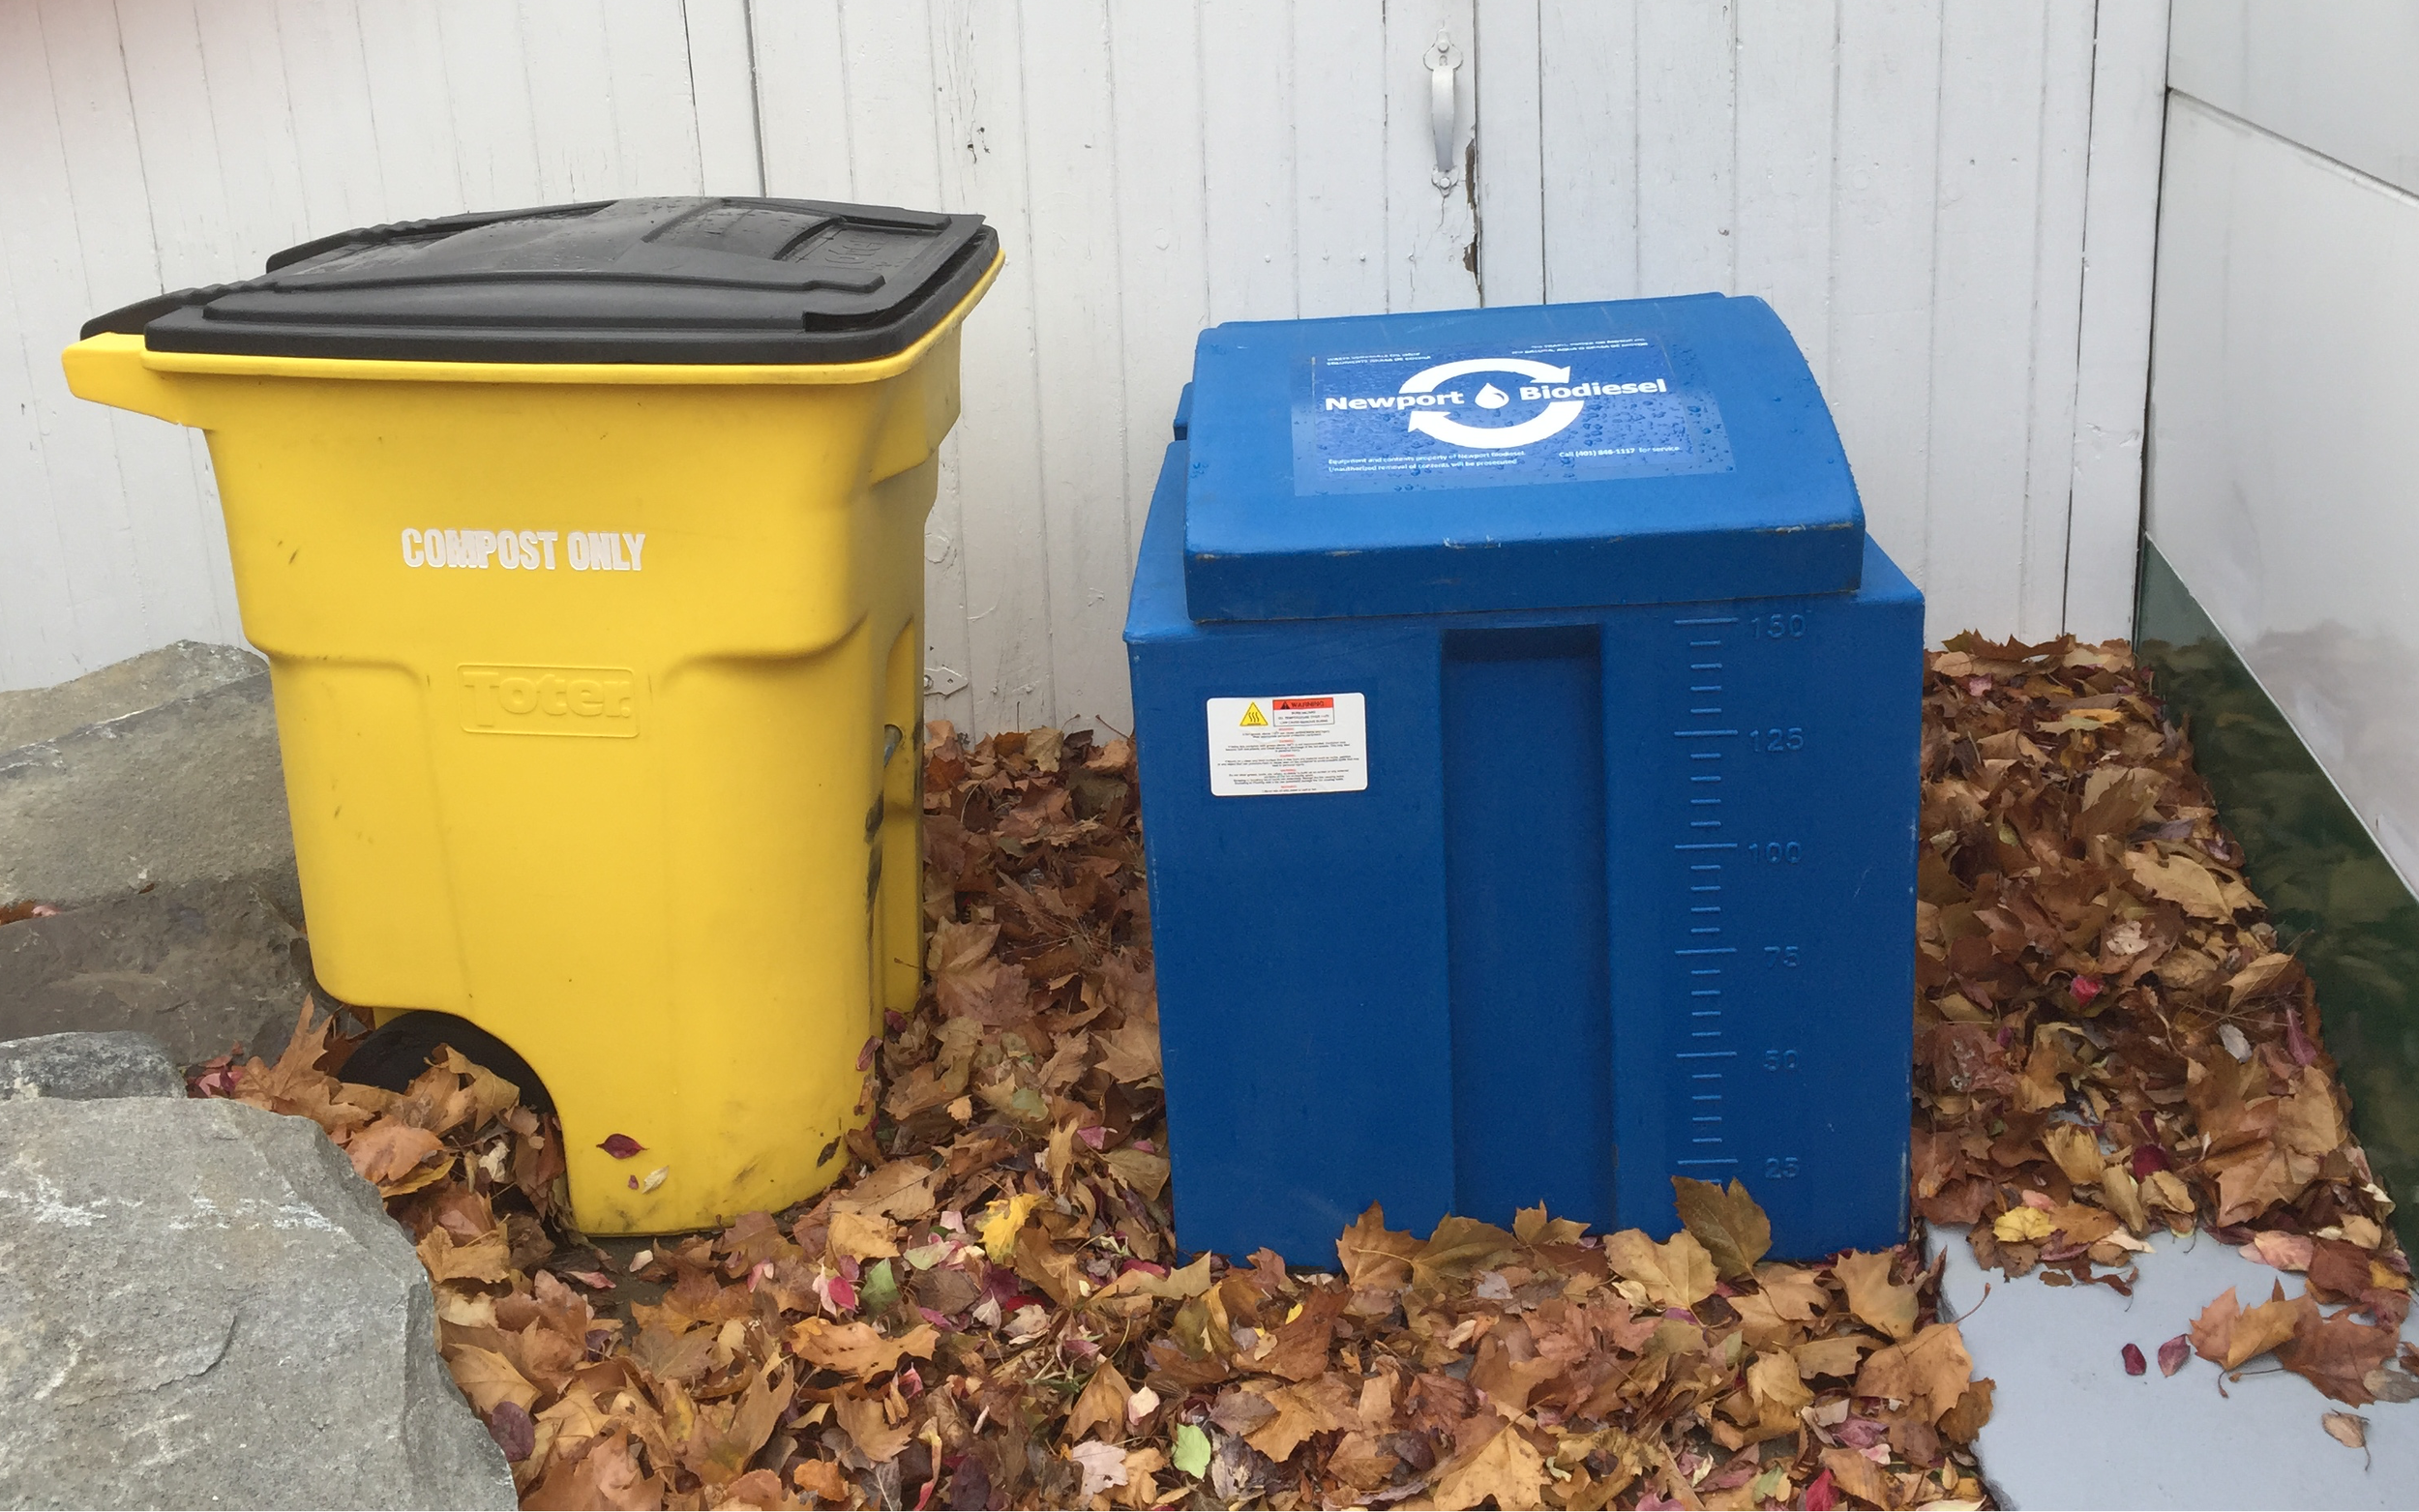  Drop off any time in our blue drop off barrel located to the left of the WBNA building. 